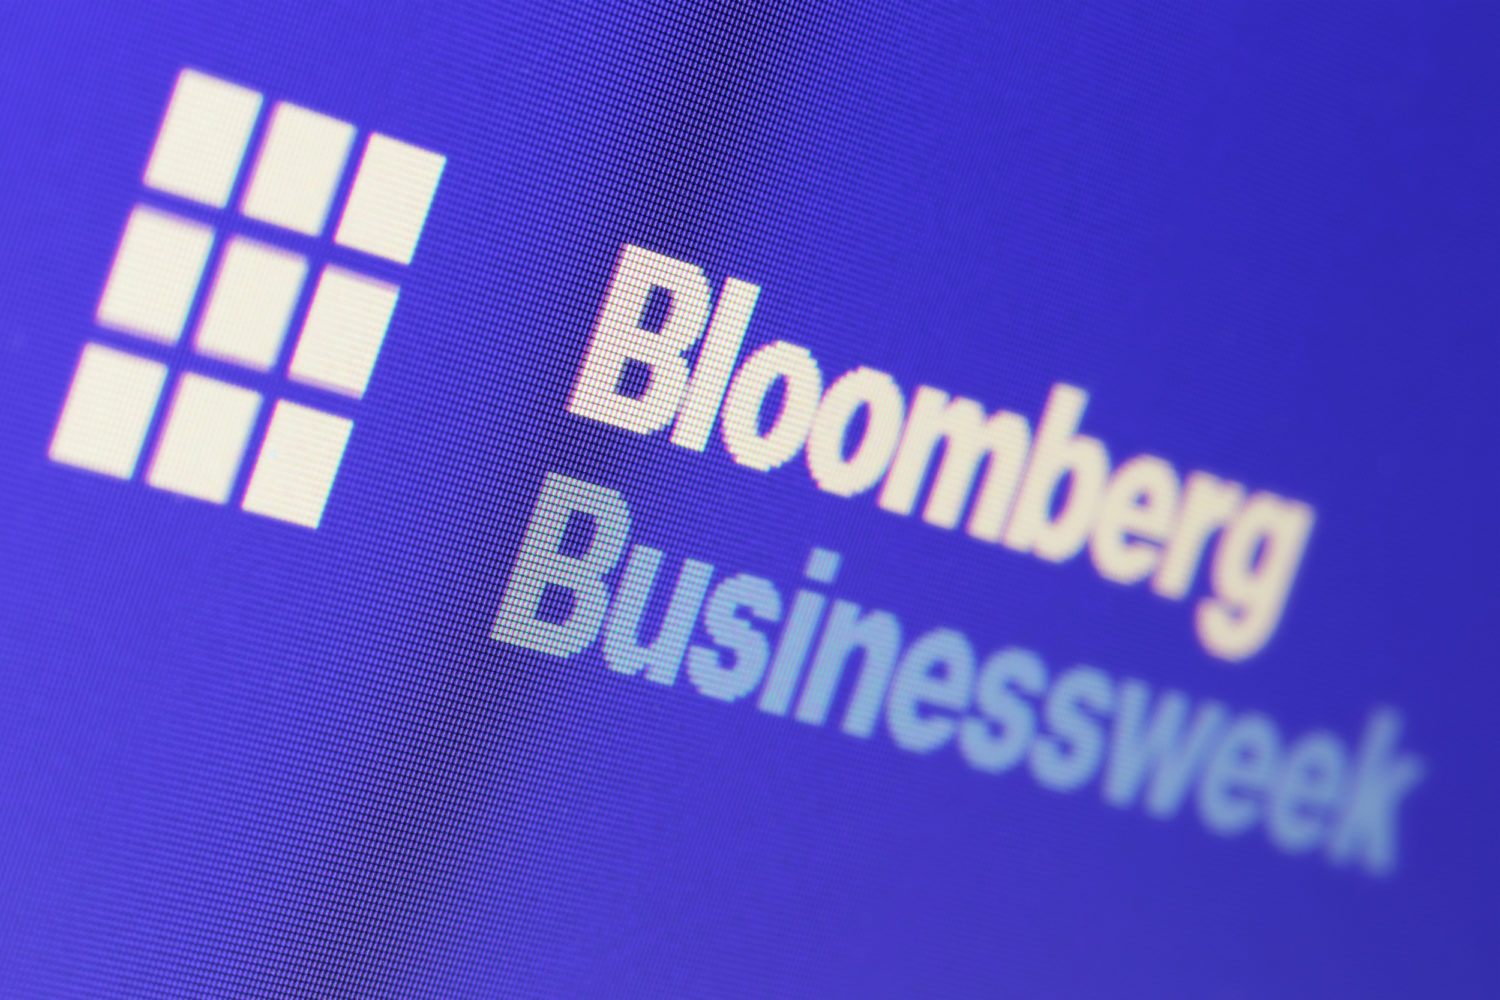 How Bloomberg Media beat the pandemic blues with explosive growth